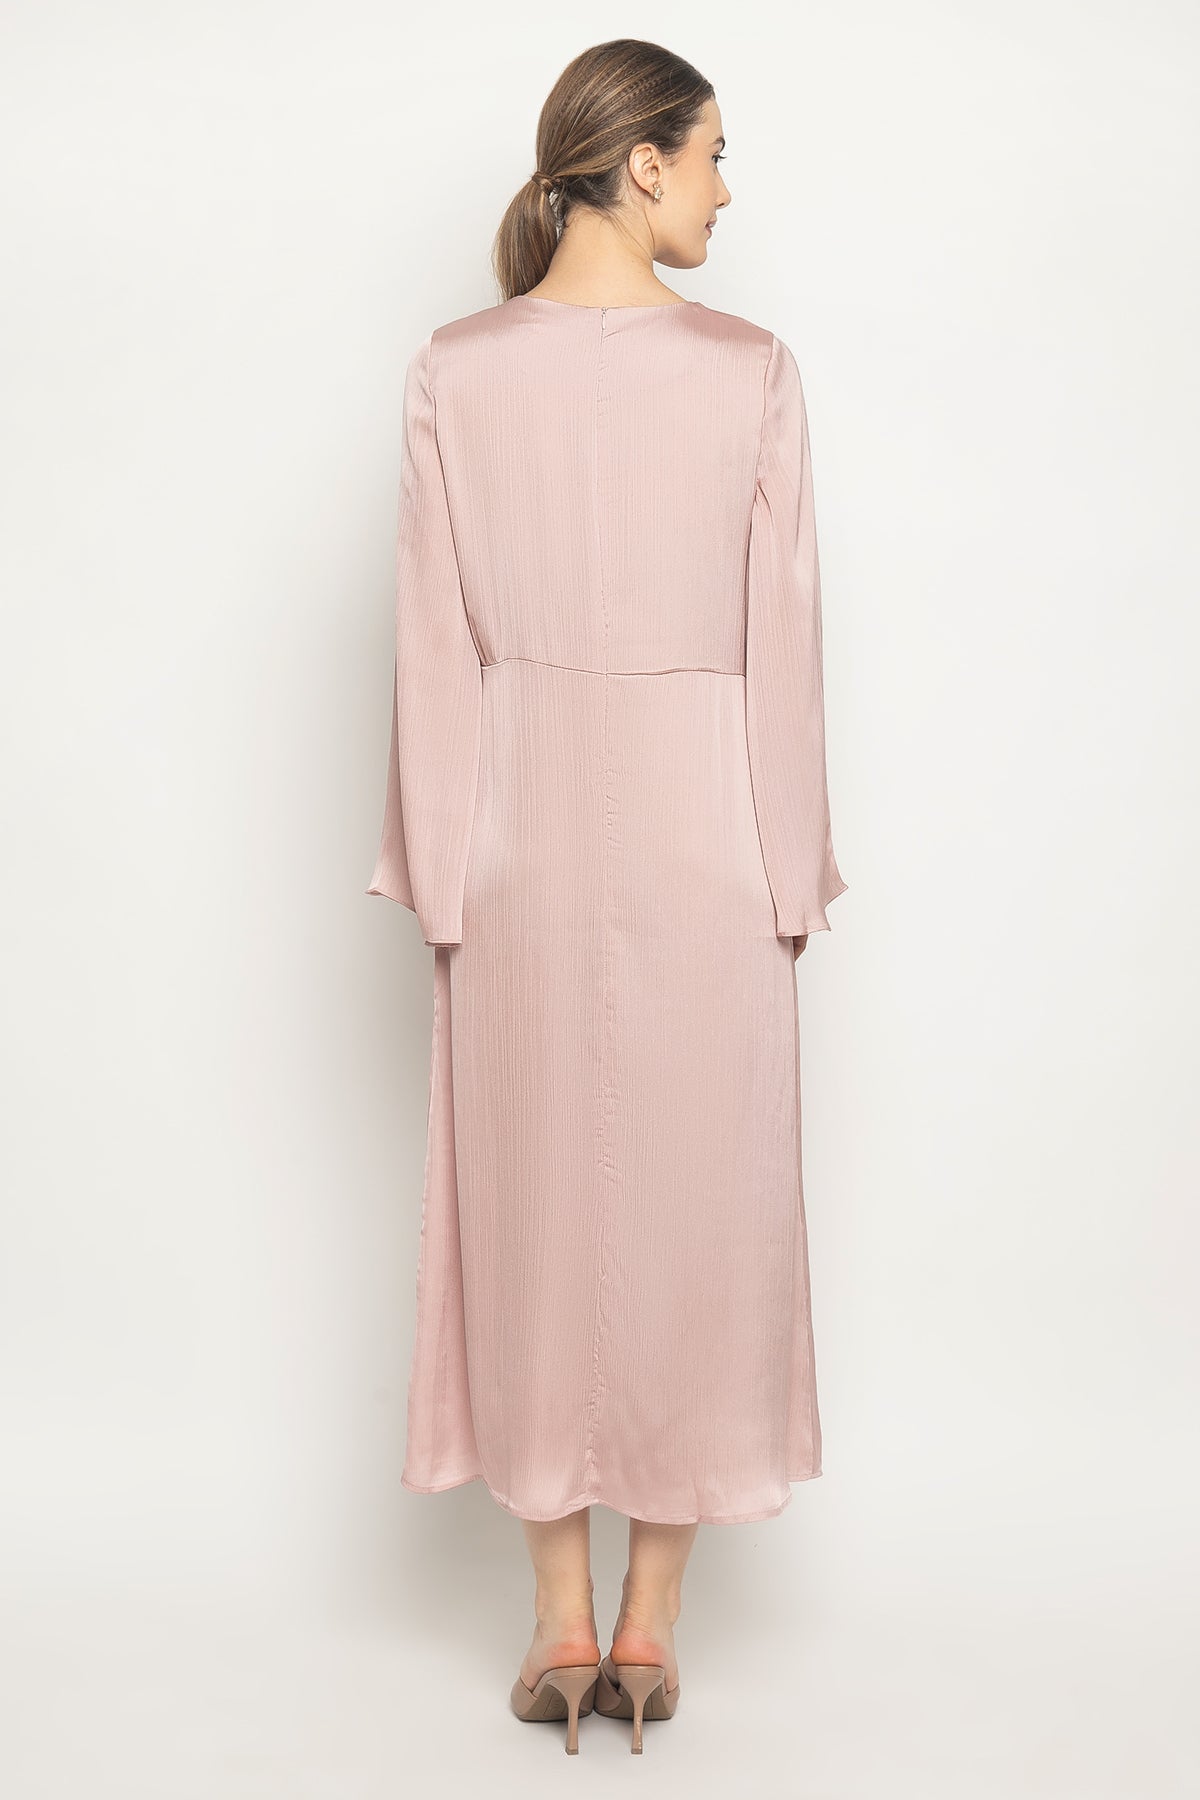 Rory Dress in Soft Pink